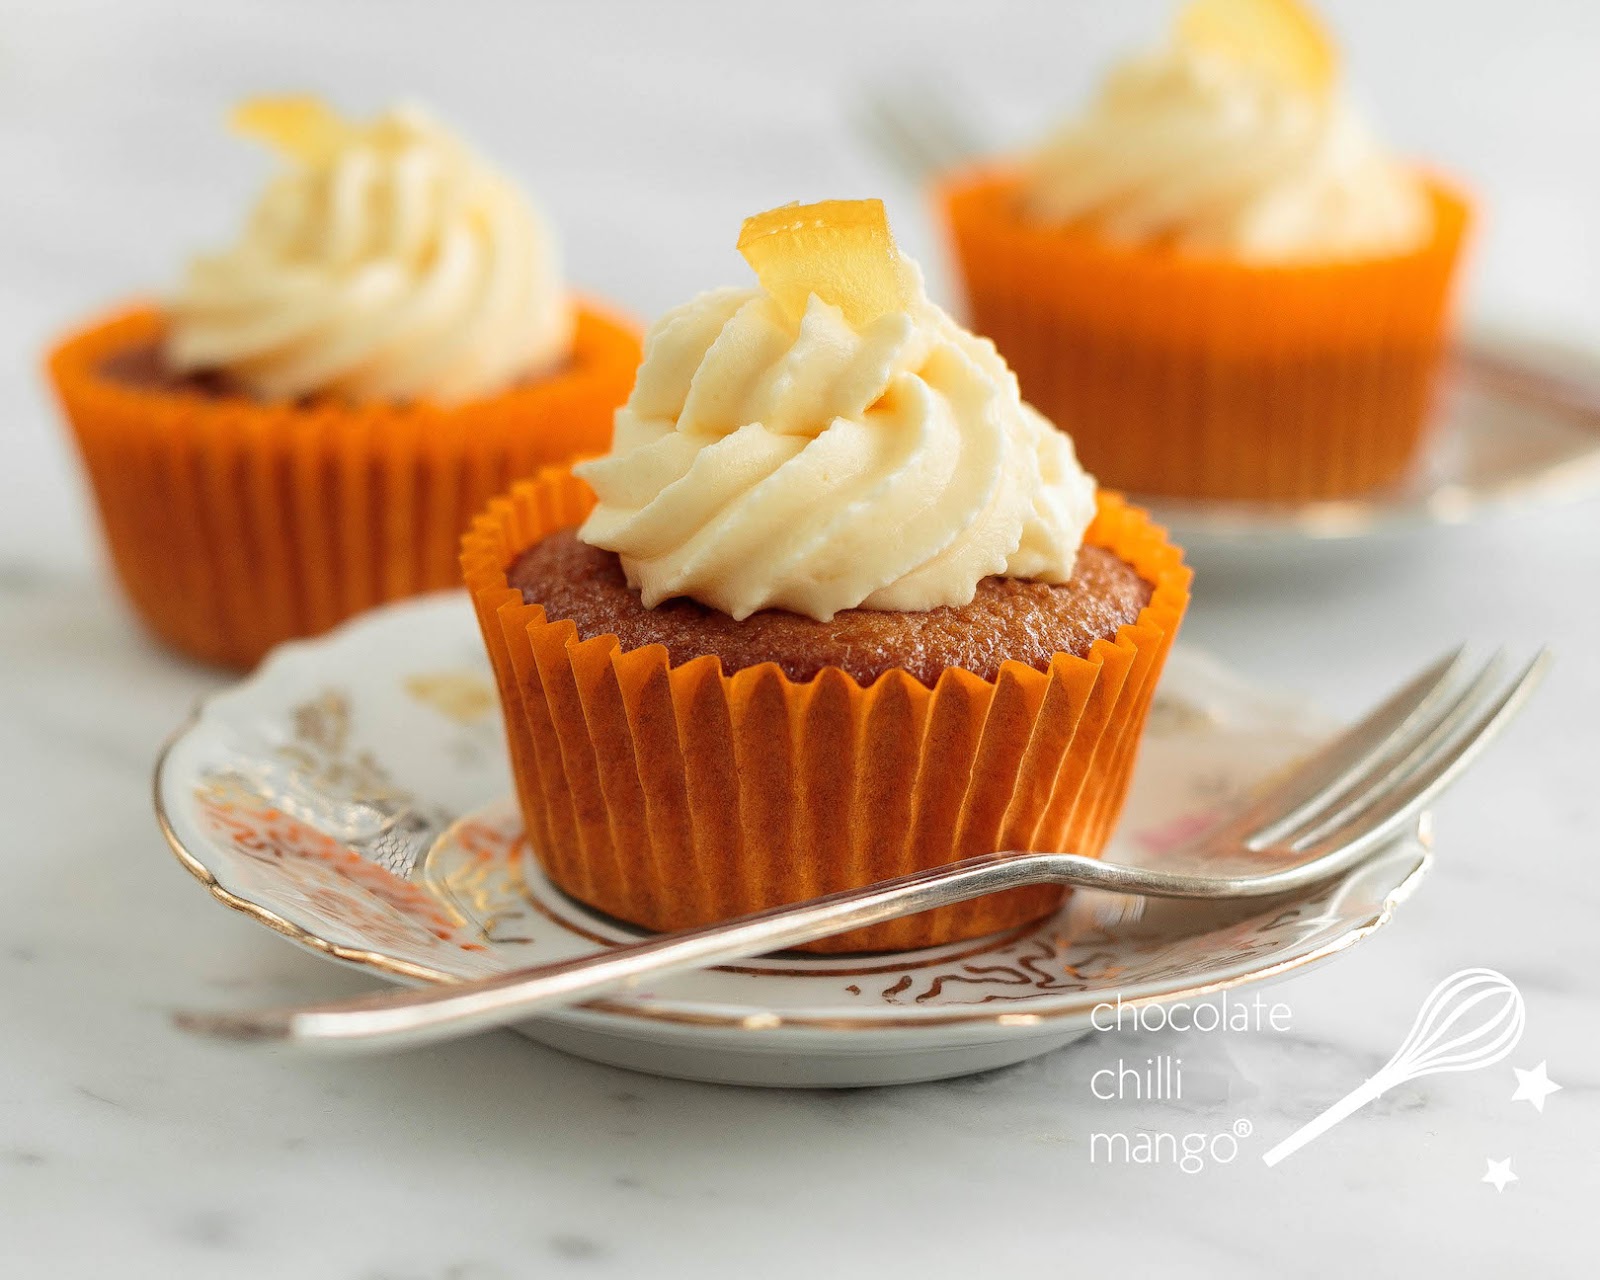 How To Cook Orange Creme Cupcakes | Recipes and Cooking